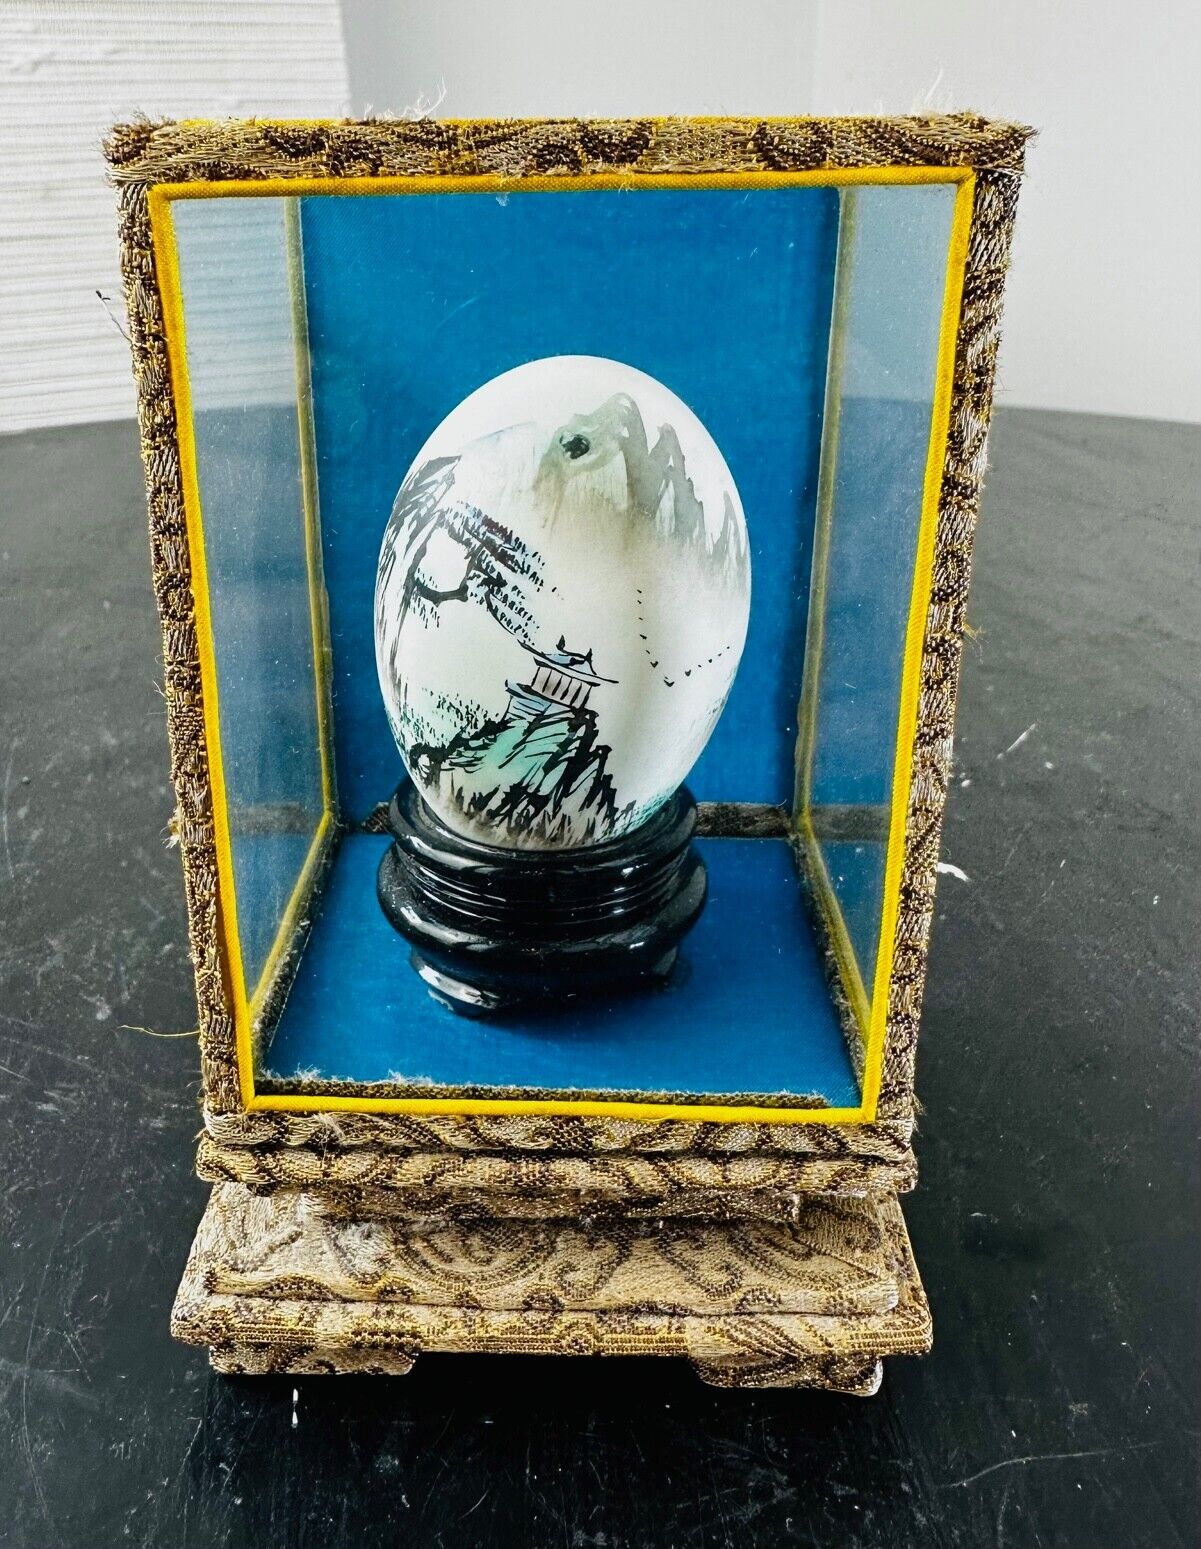 Hand Painted Japanese Egg Shell in Display Case -Original Box